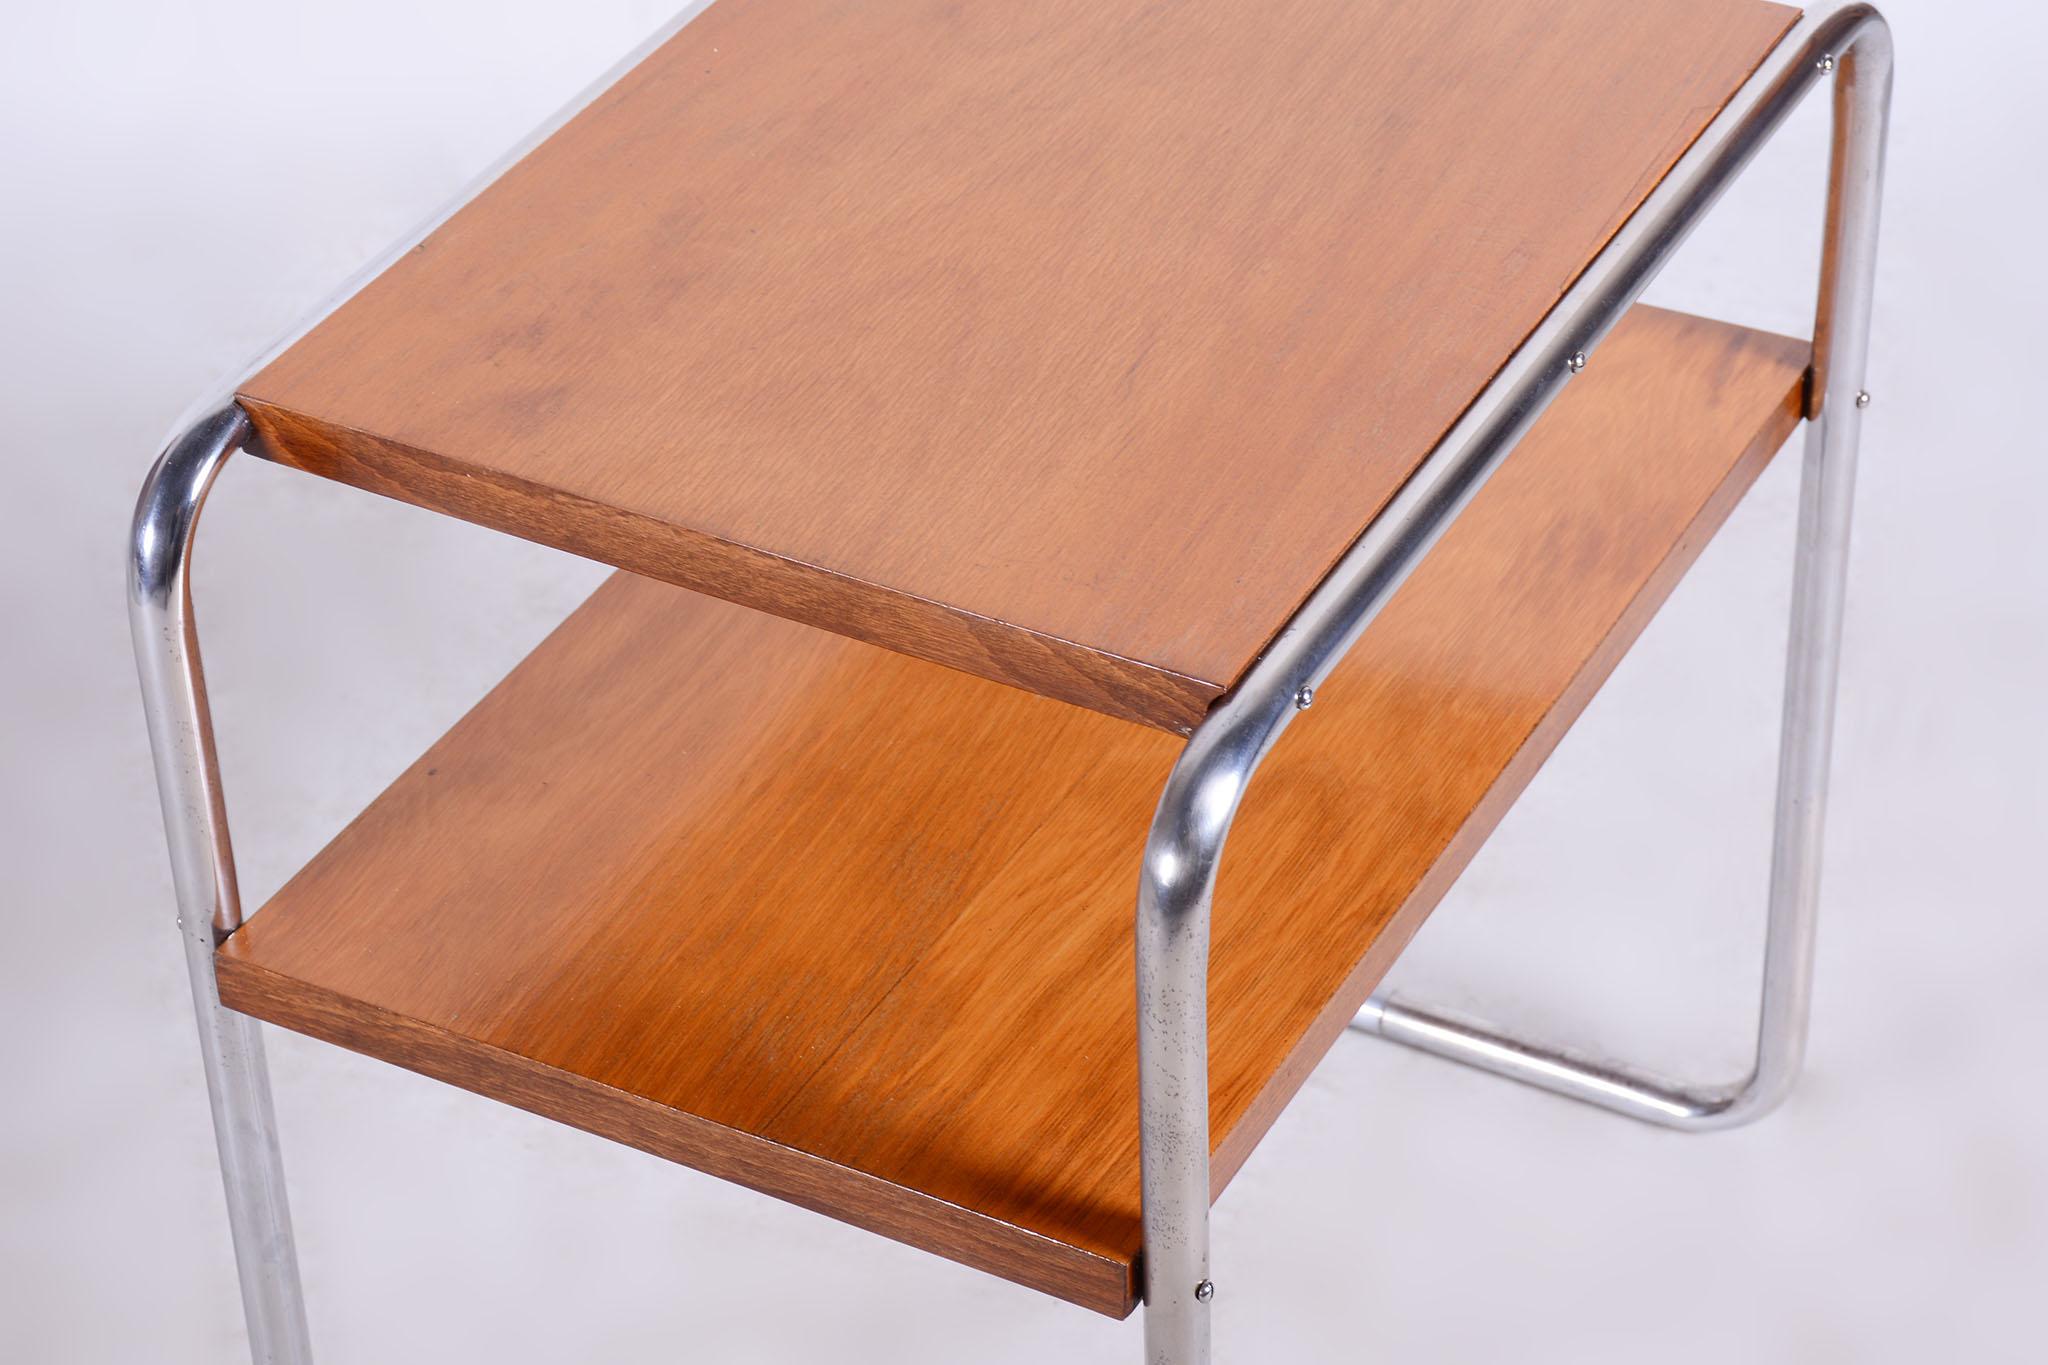 Restored Bauhaus Side Table, Oak, Chrome-Plated Steel, Czechia, 1930s In Good Condition For Sale In Horomerice, CZ